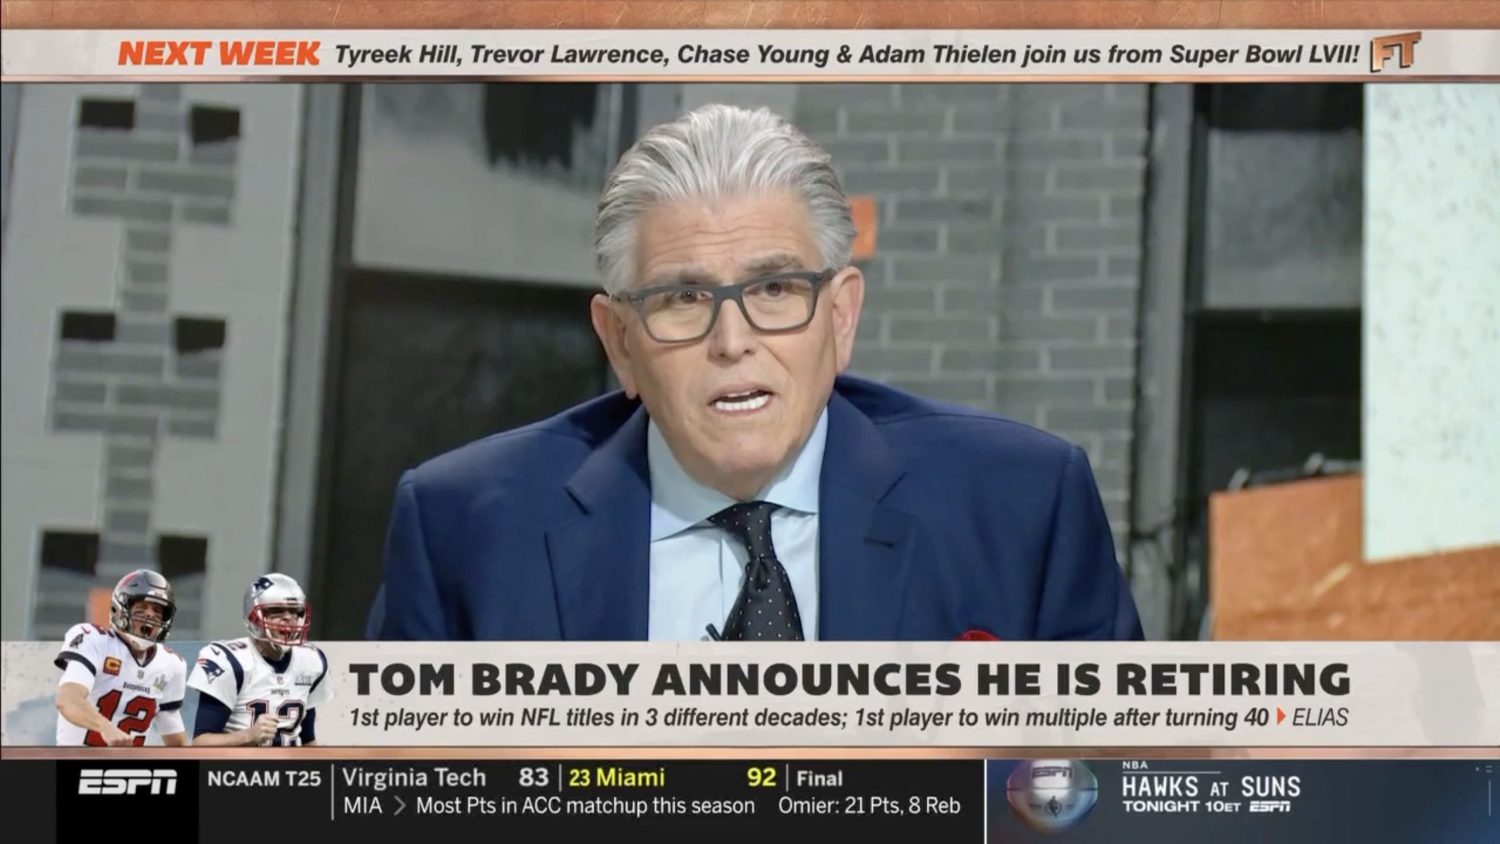 Mike Francesa on First Take discussing Tom Brady's retirement